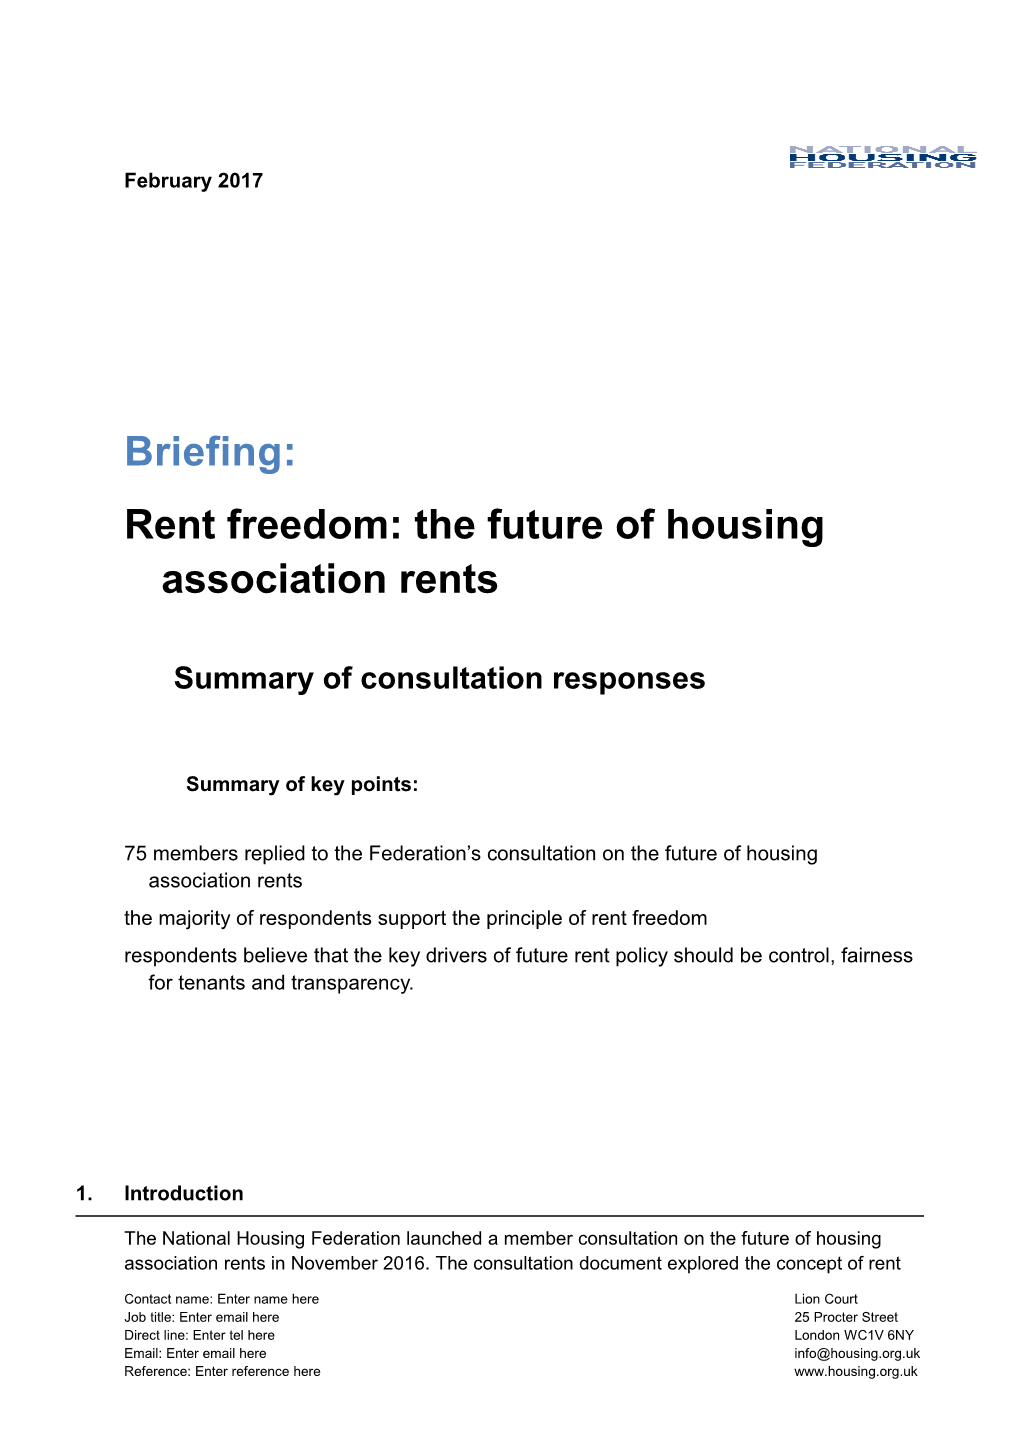 Rent Freedom: the Future of Housing Association Rents